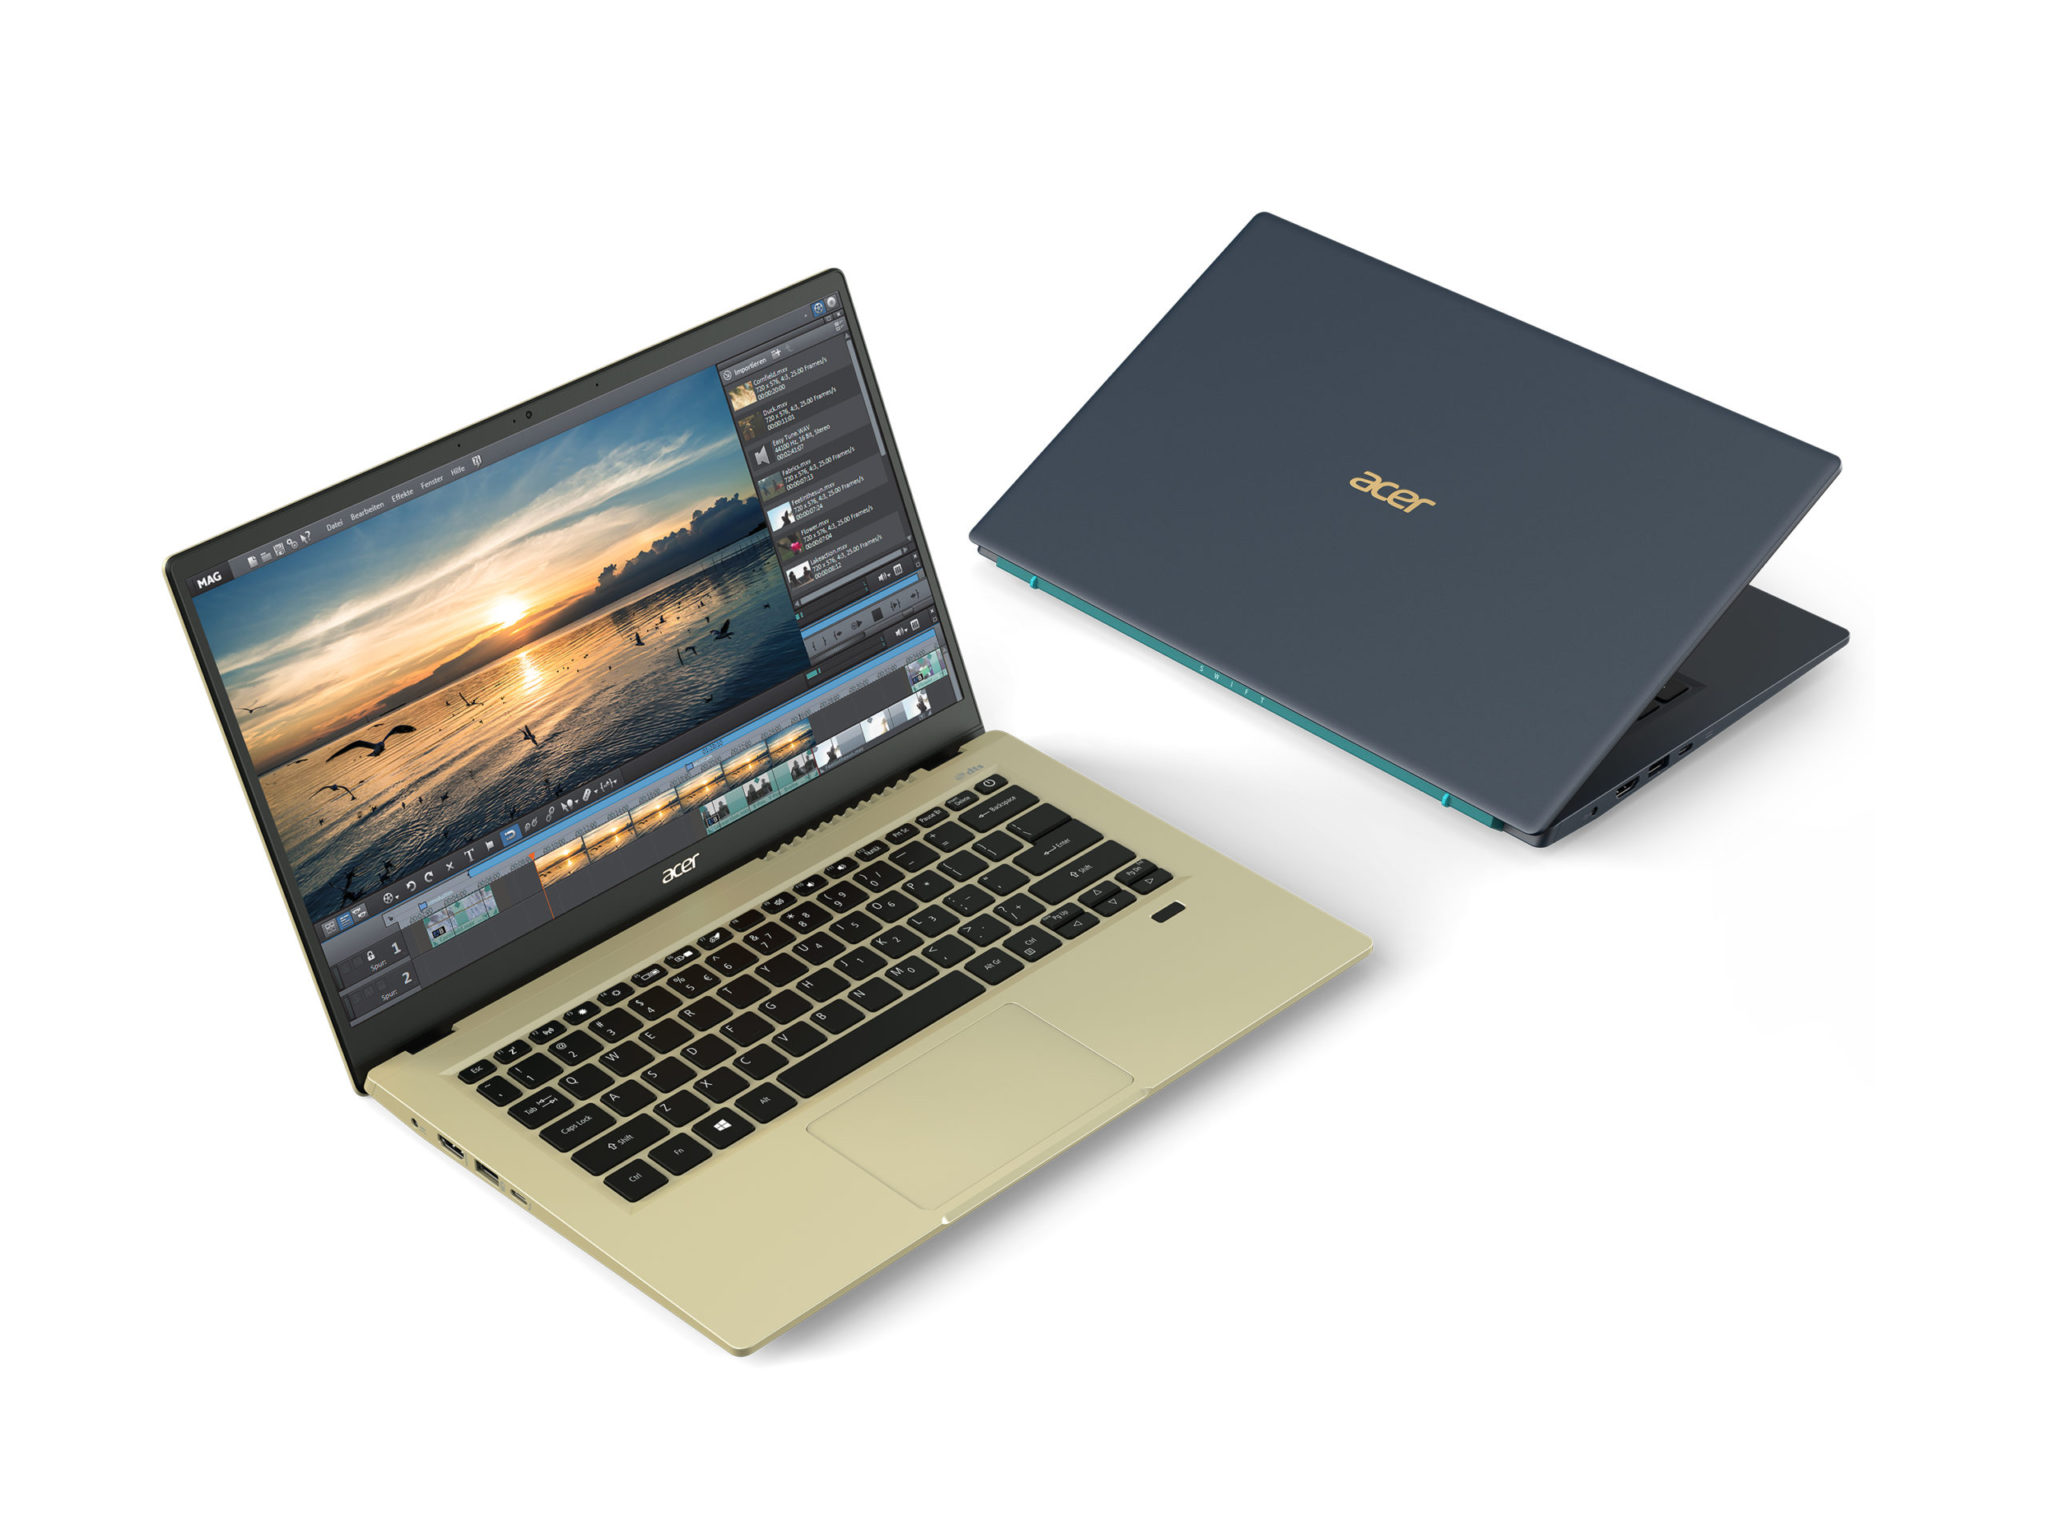 Acer announces latest lineup of consumer laptops, introduces new TravelMate notebooks and Porsche Design Acer Book RS